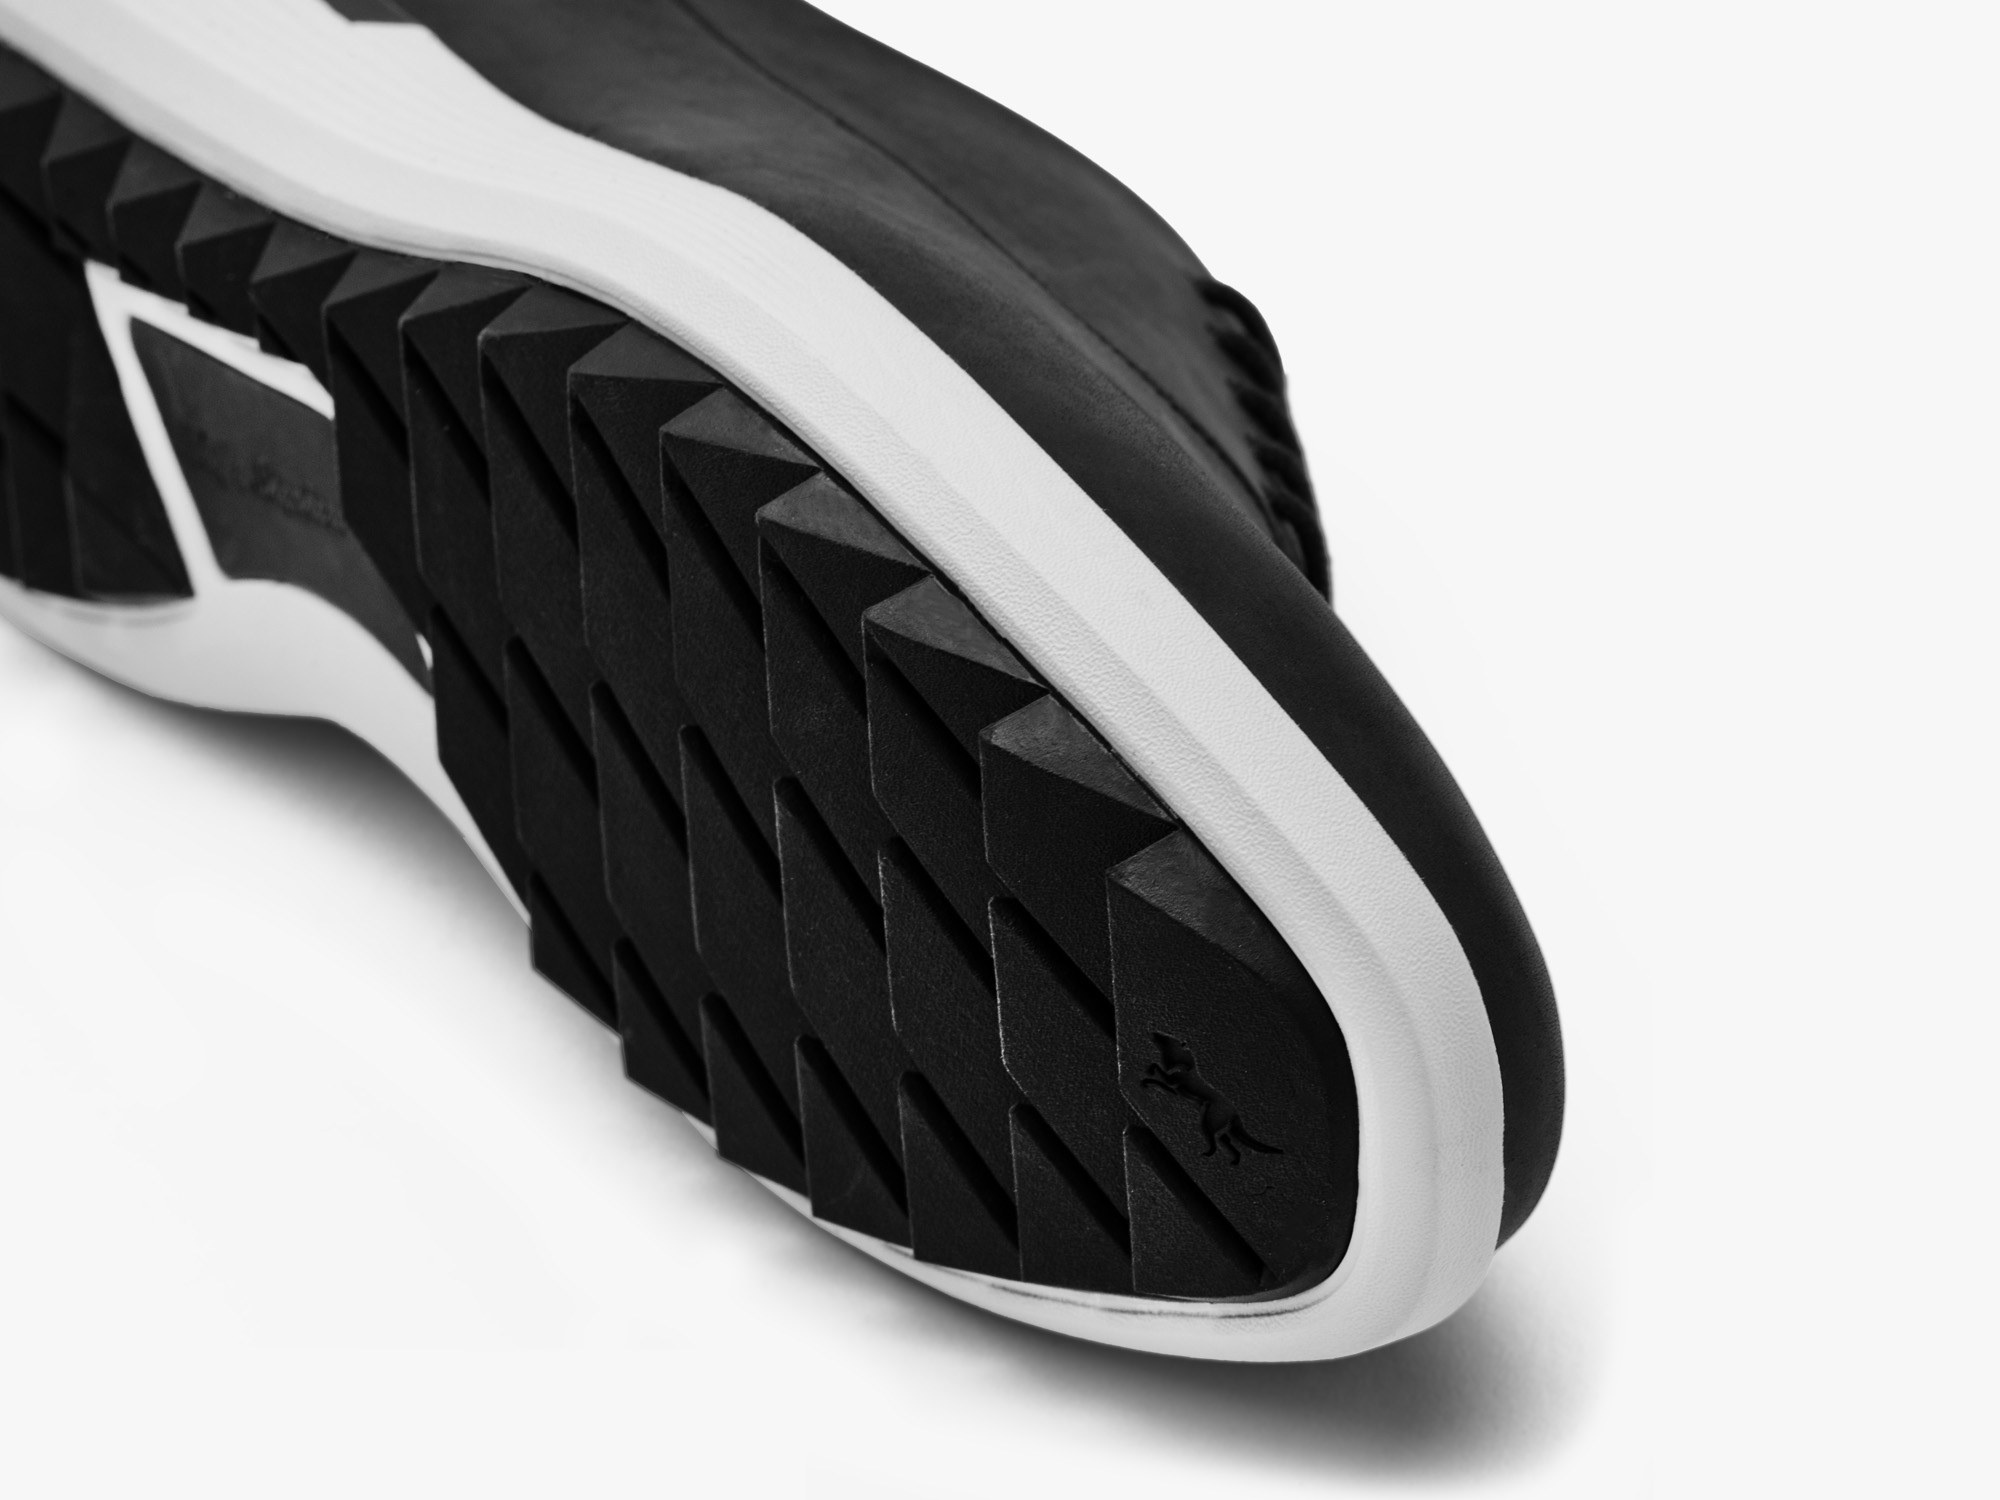 Side view of Crossover WTZ Longwing on white background exposing the toothgrip sole